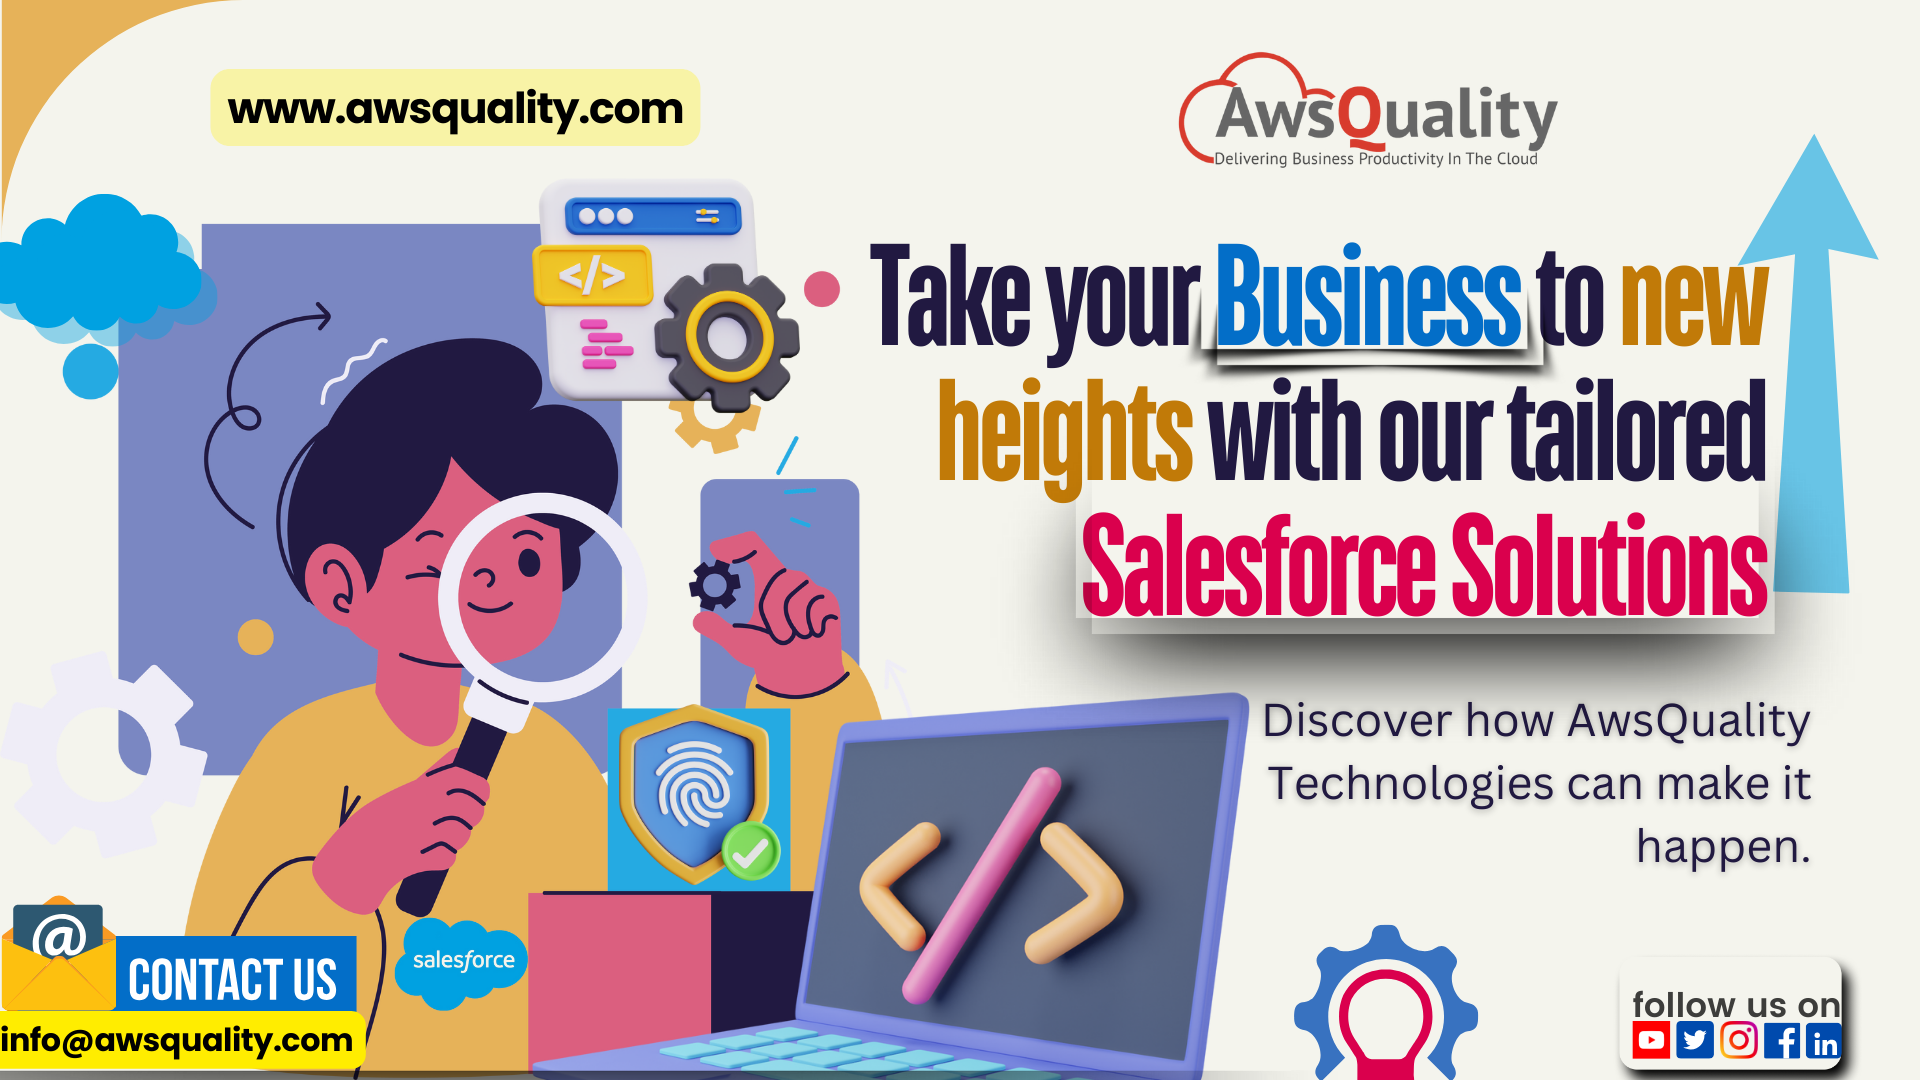 Boost your business growth with AwsQuality's expert Salesforce developers. Streamline operations and achieve success with our tailored solutions. Learn more now!